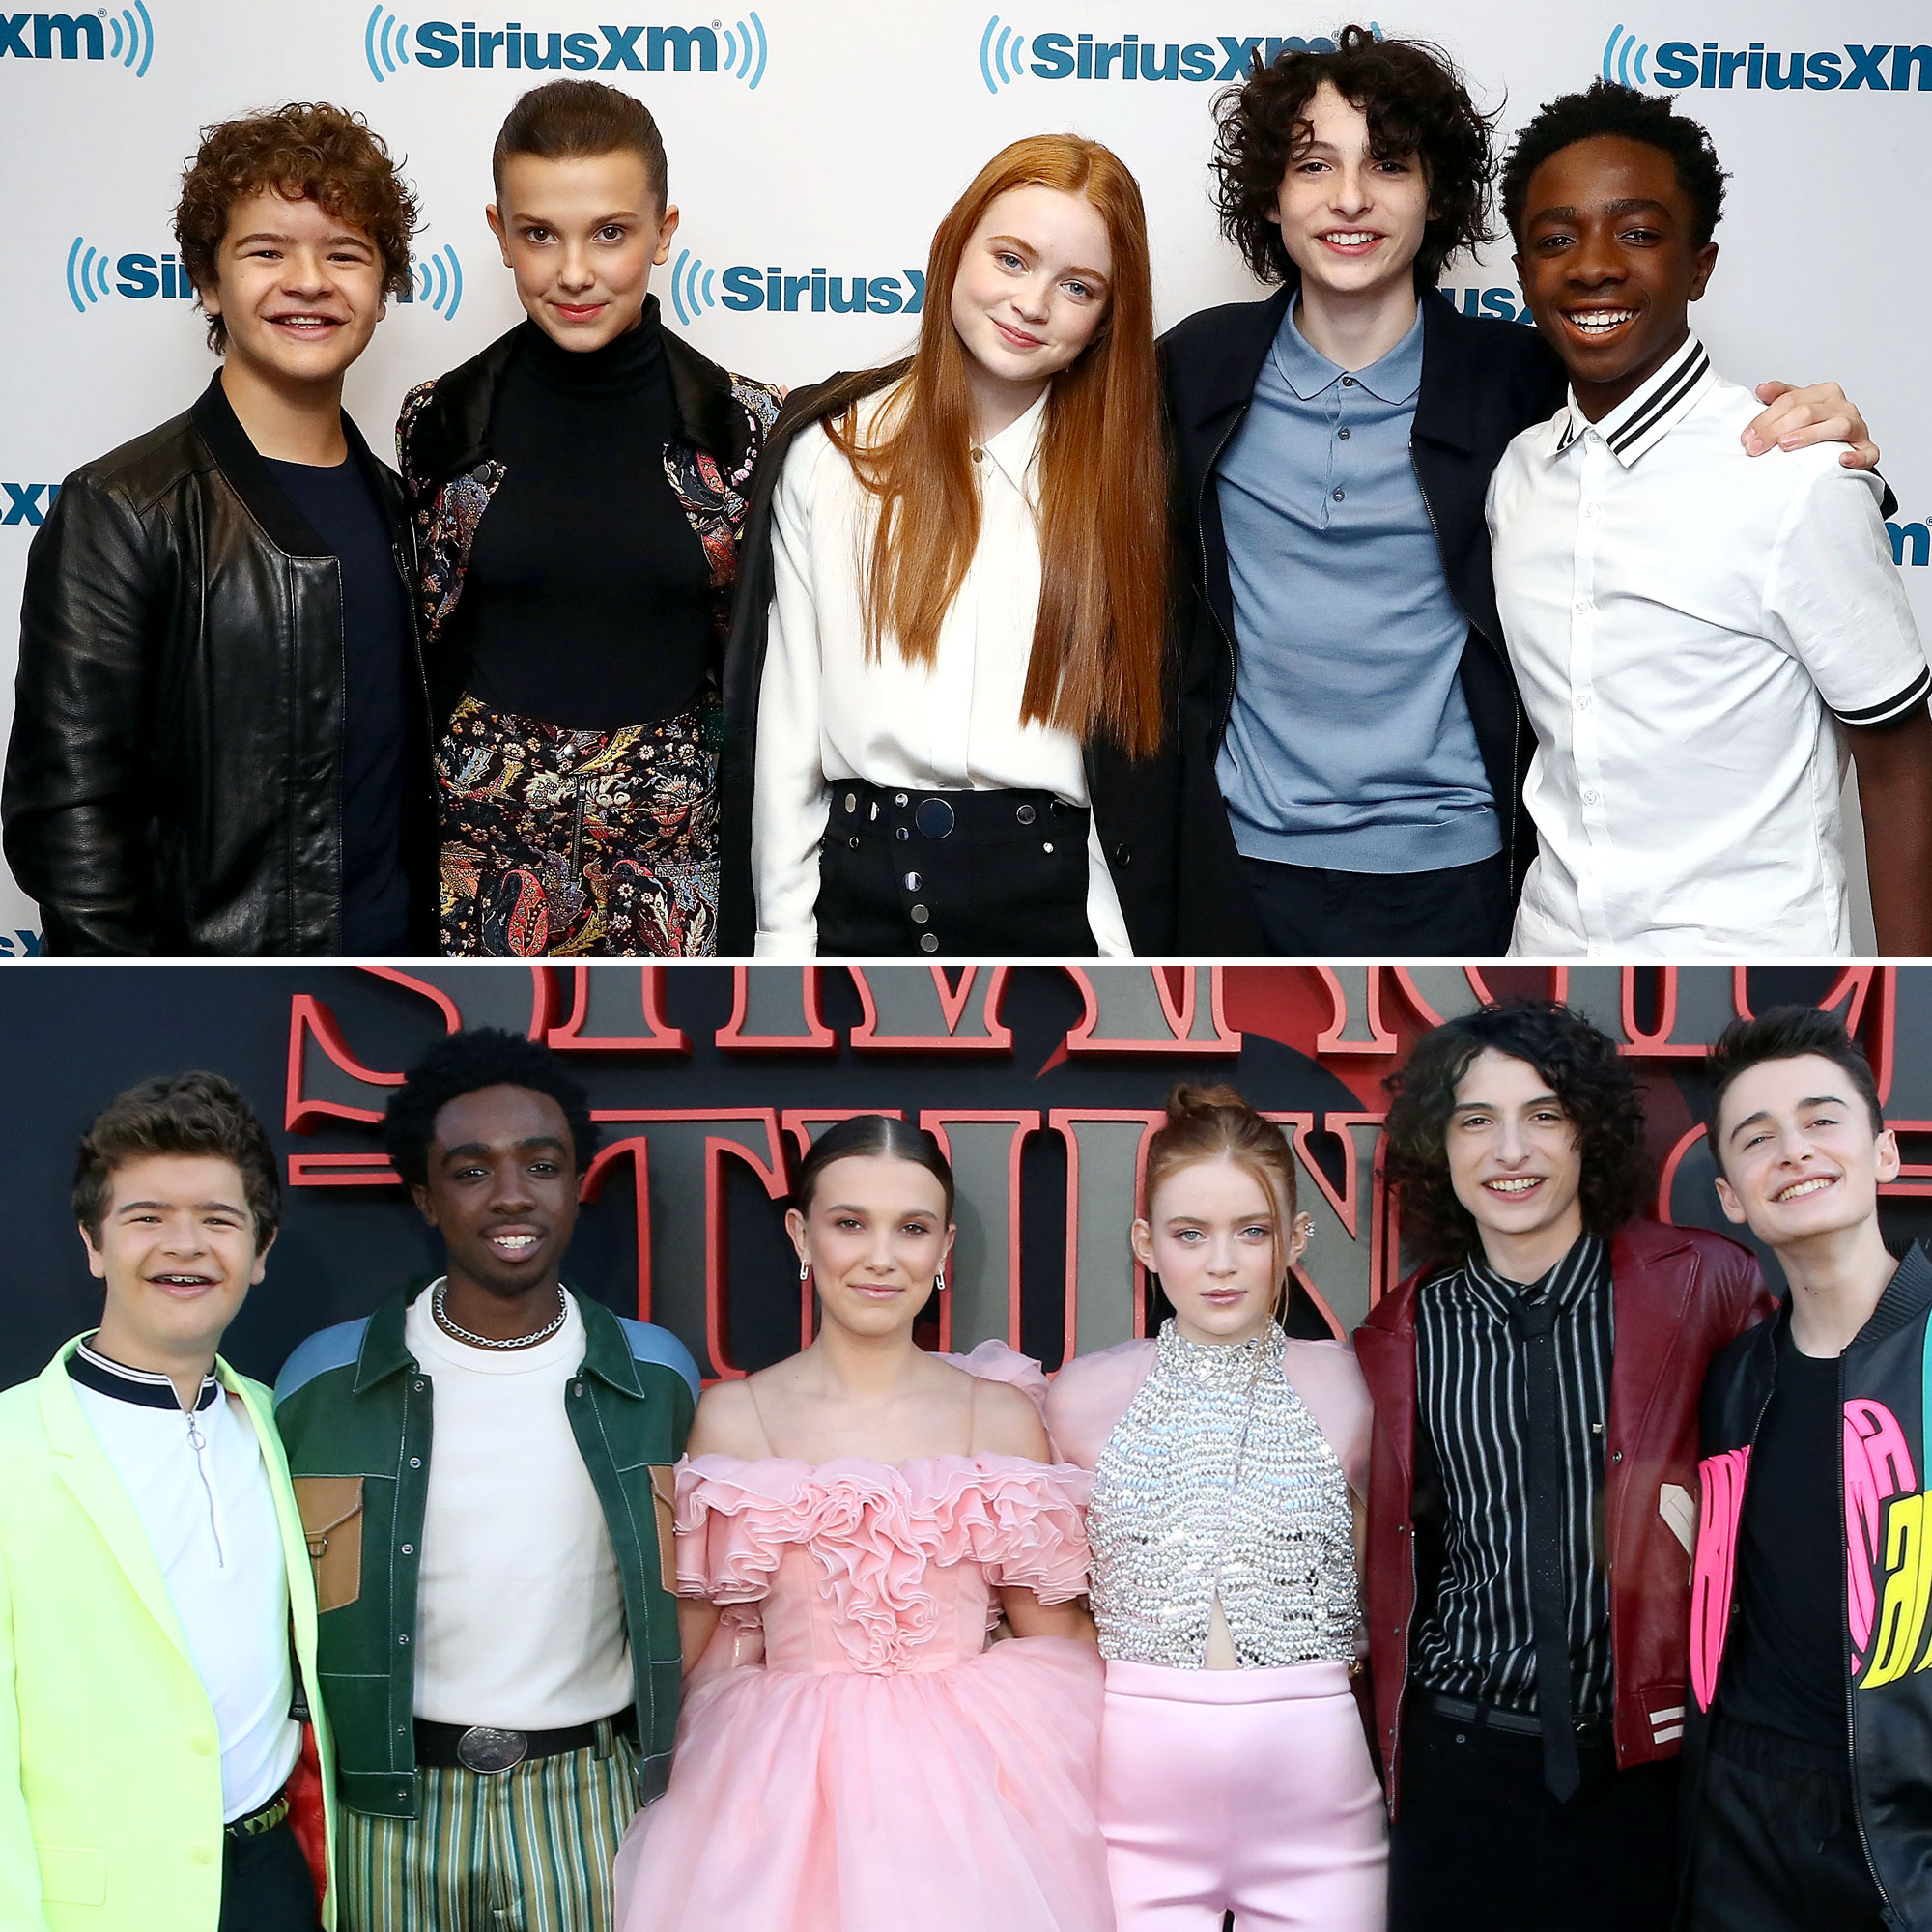 stranger-things-character-names-quiz-by-emmaleemo09